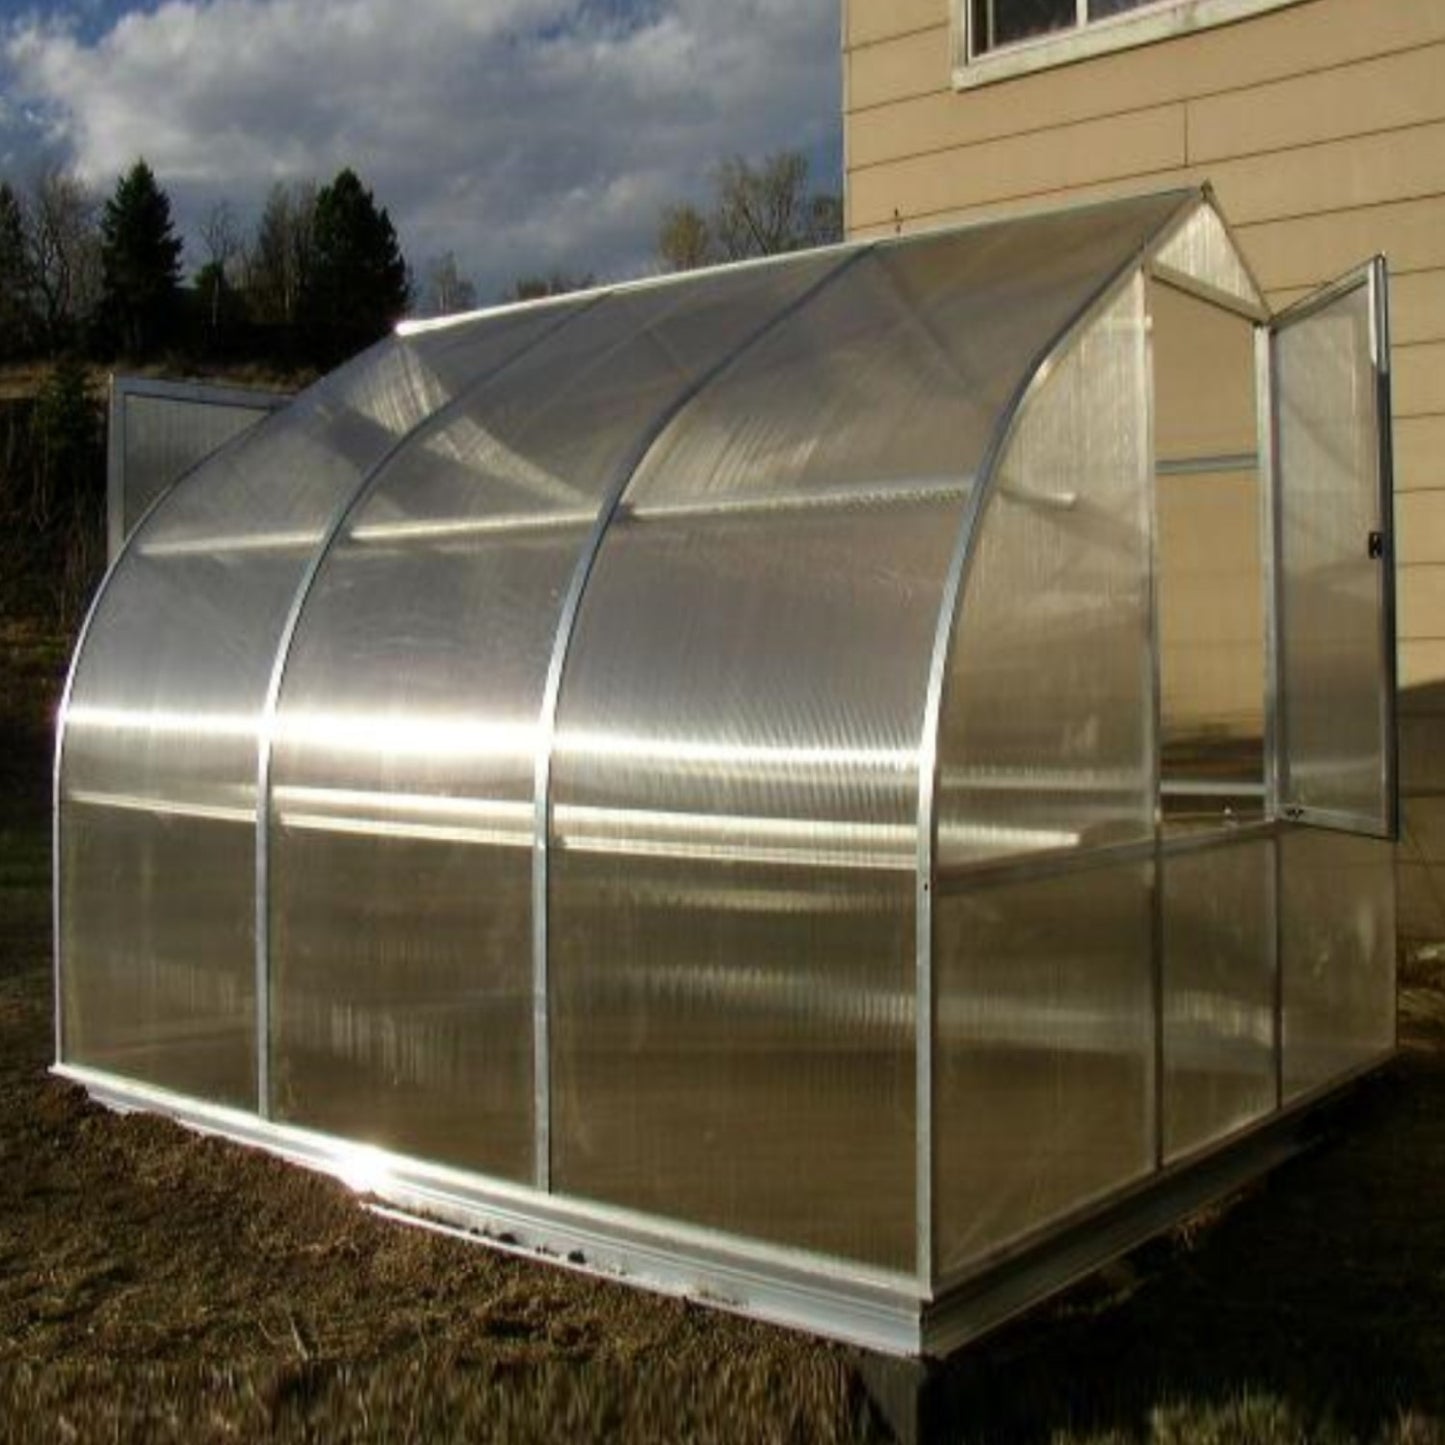 Hoklartherm | 7ft 8in x 10ft 6in x 7ft 1in RIGA 3S Hobby Greenhouse Kit With 8mm Twin-wall Polycarbonate Glazing